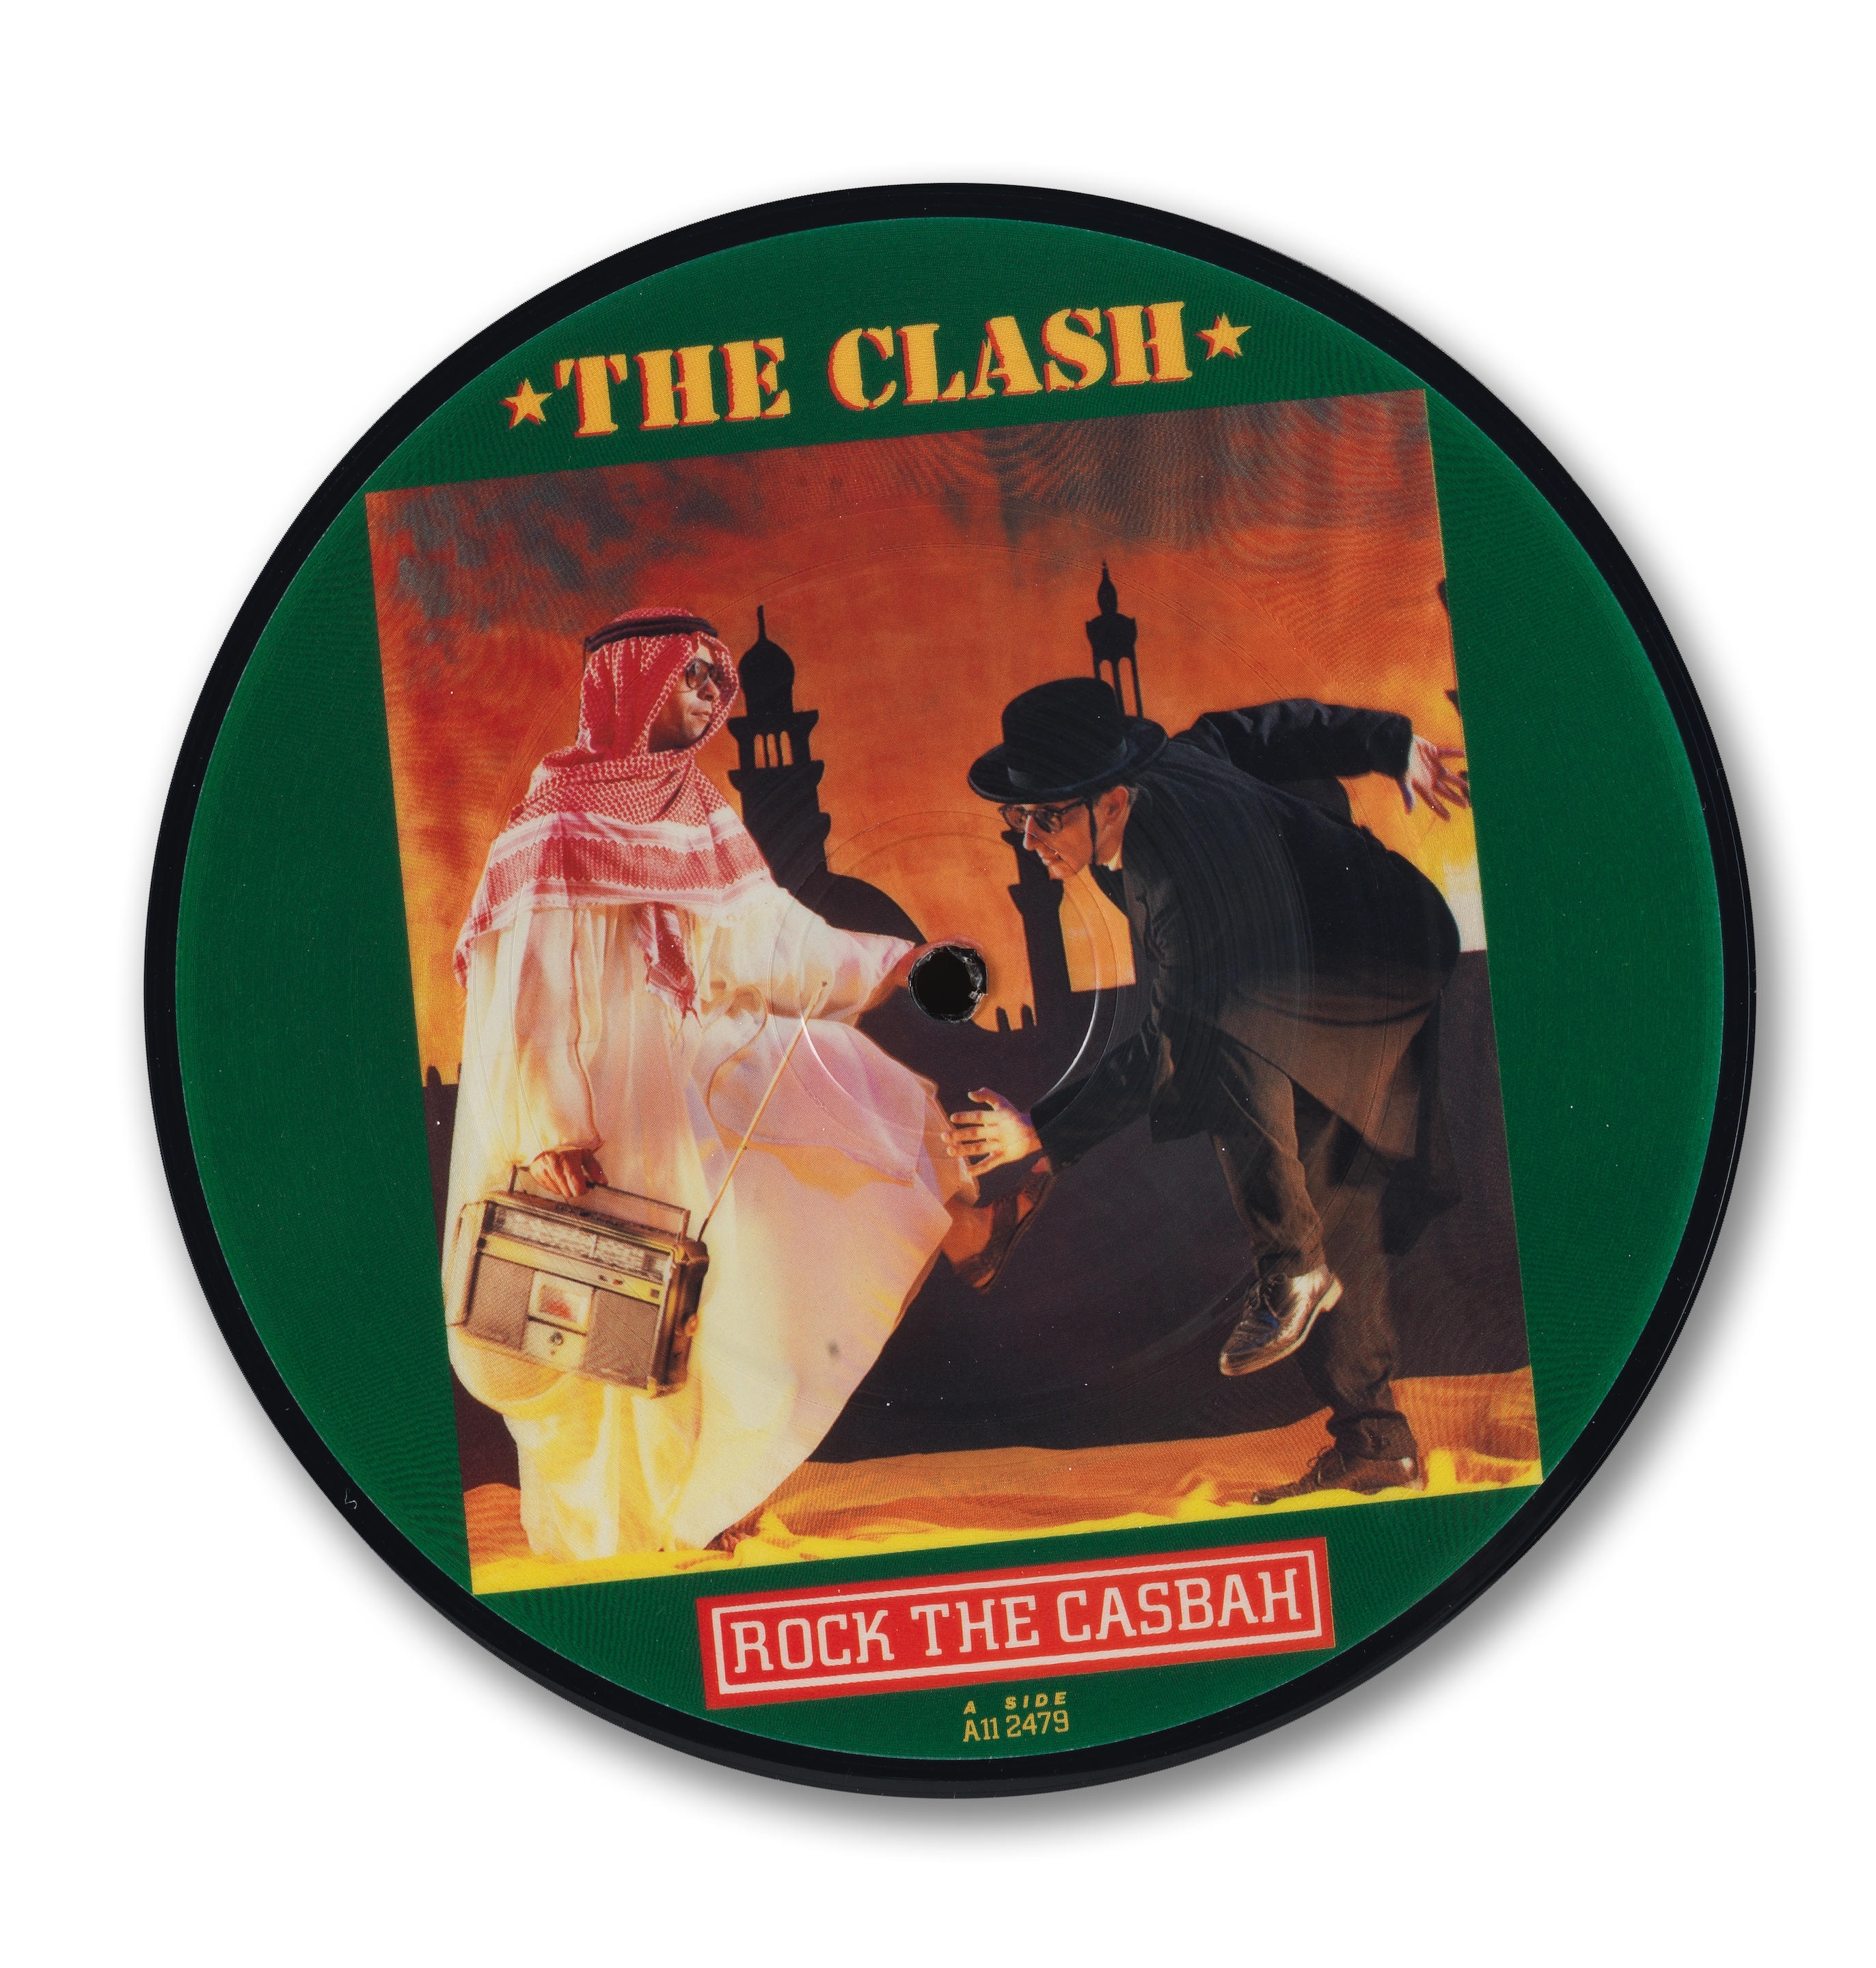 The Clash | A selection of vinyl records from Bernard Rhodes